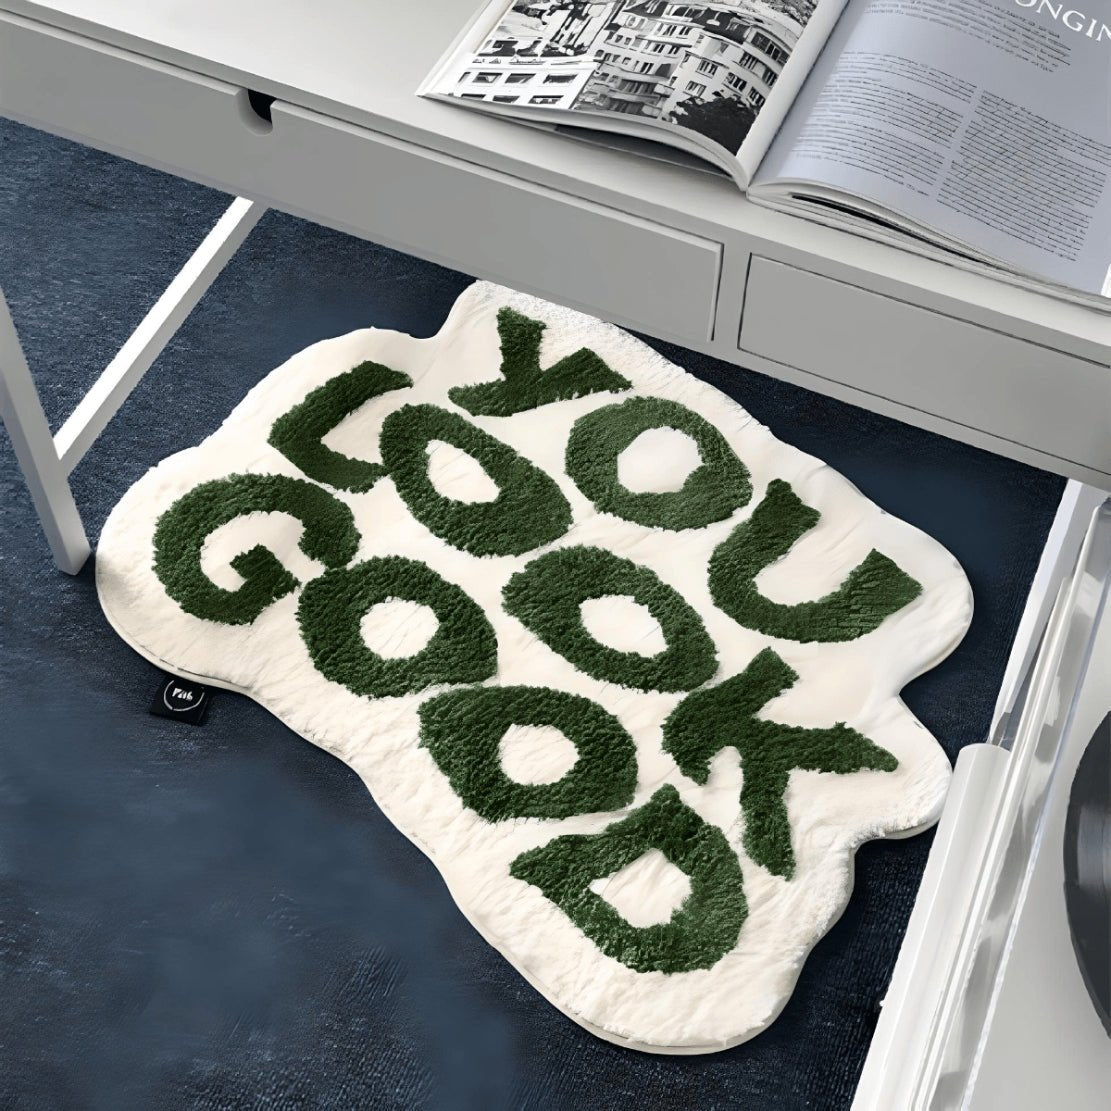 Green & white "You Look Good" text floor rug